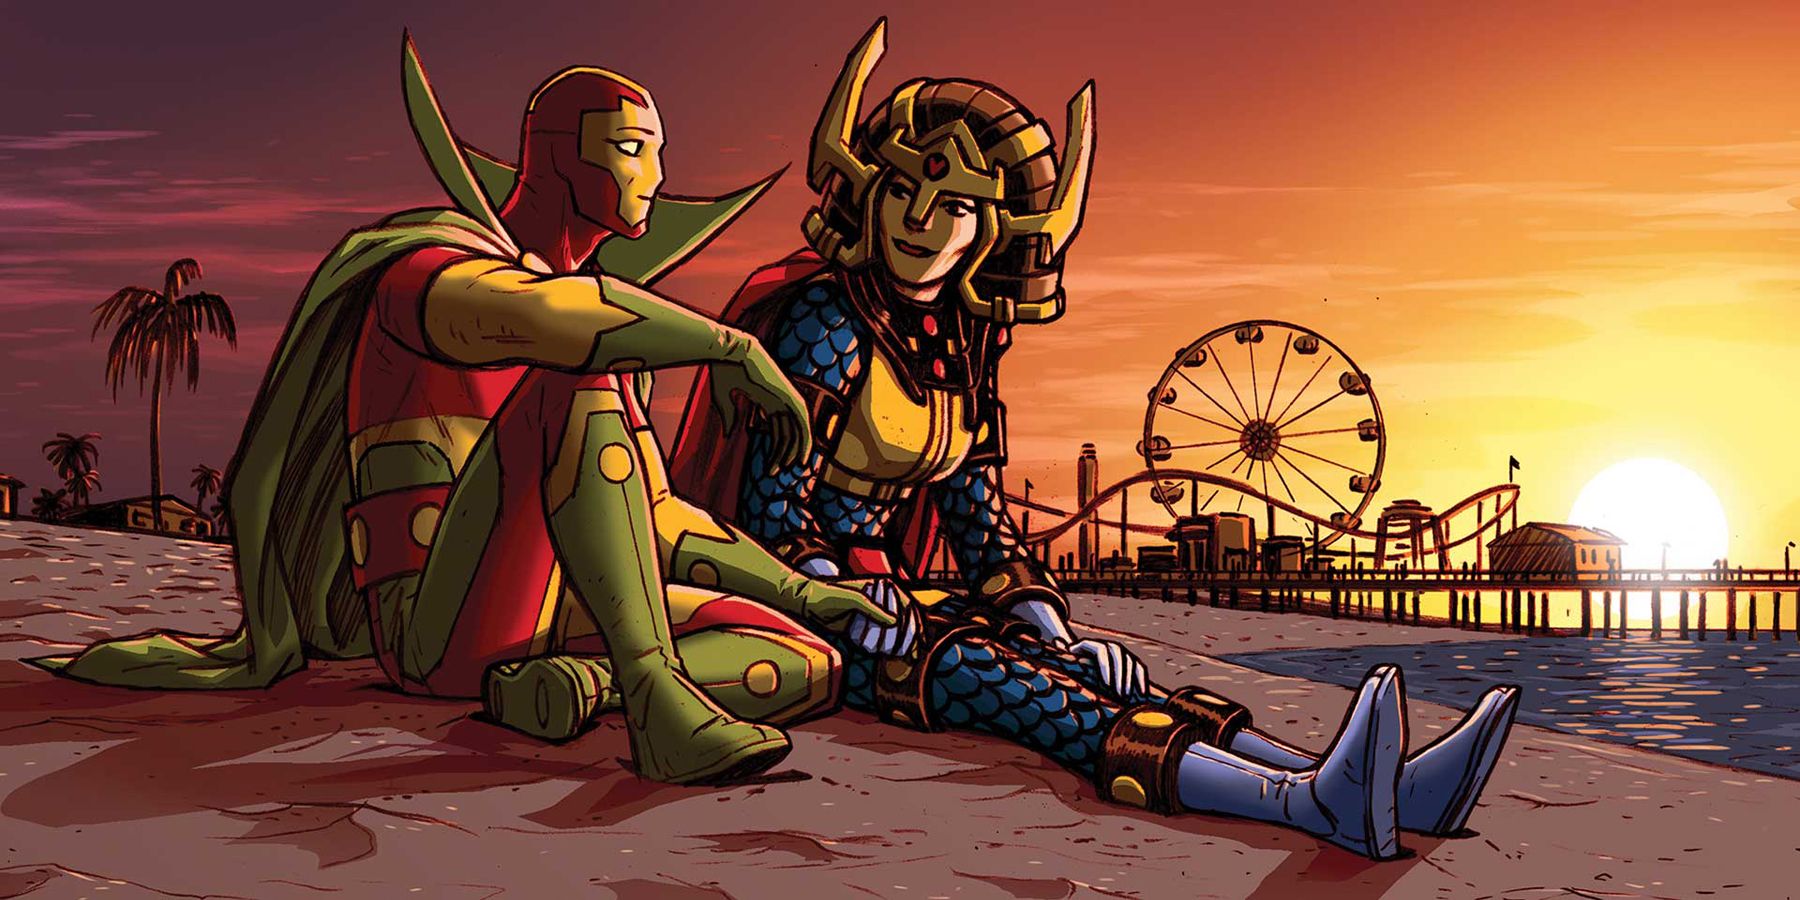 Mister Miracle and Big Barda on the beach